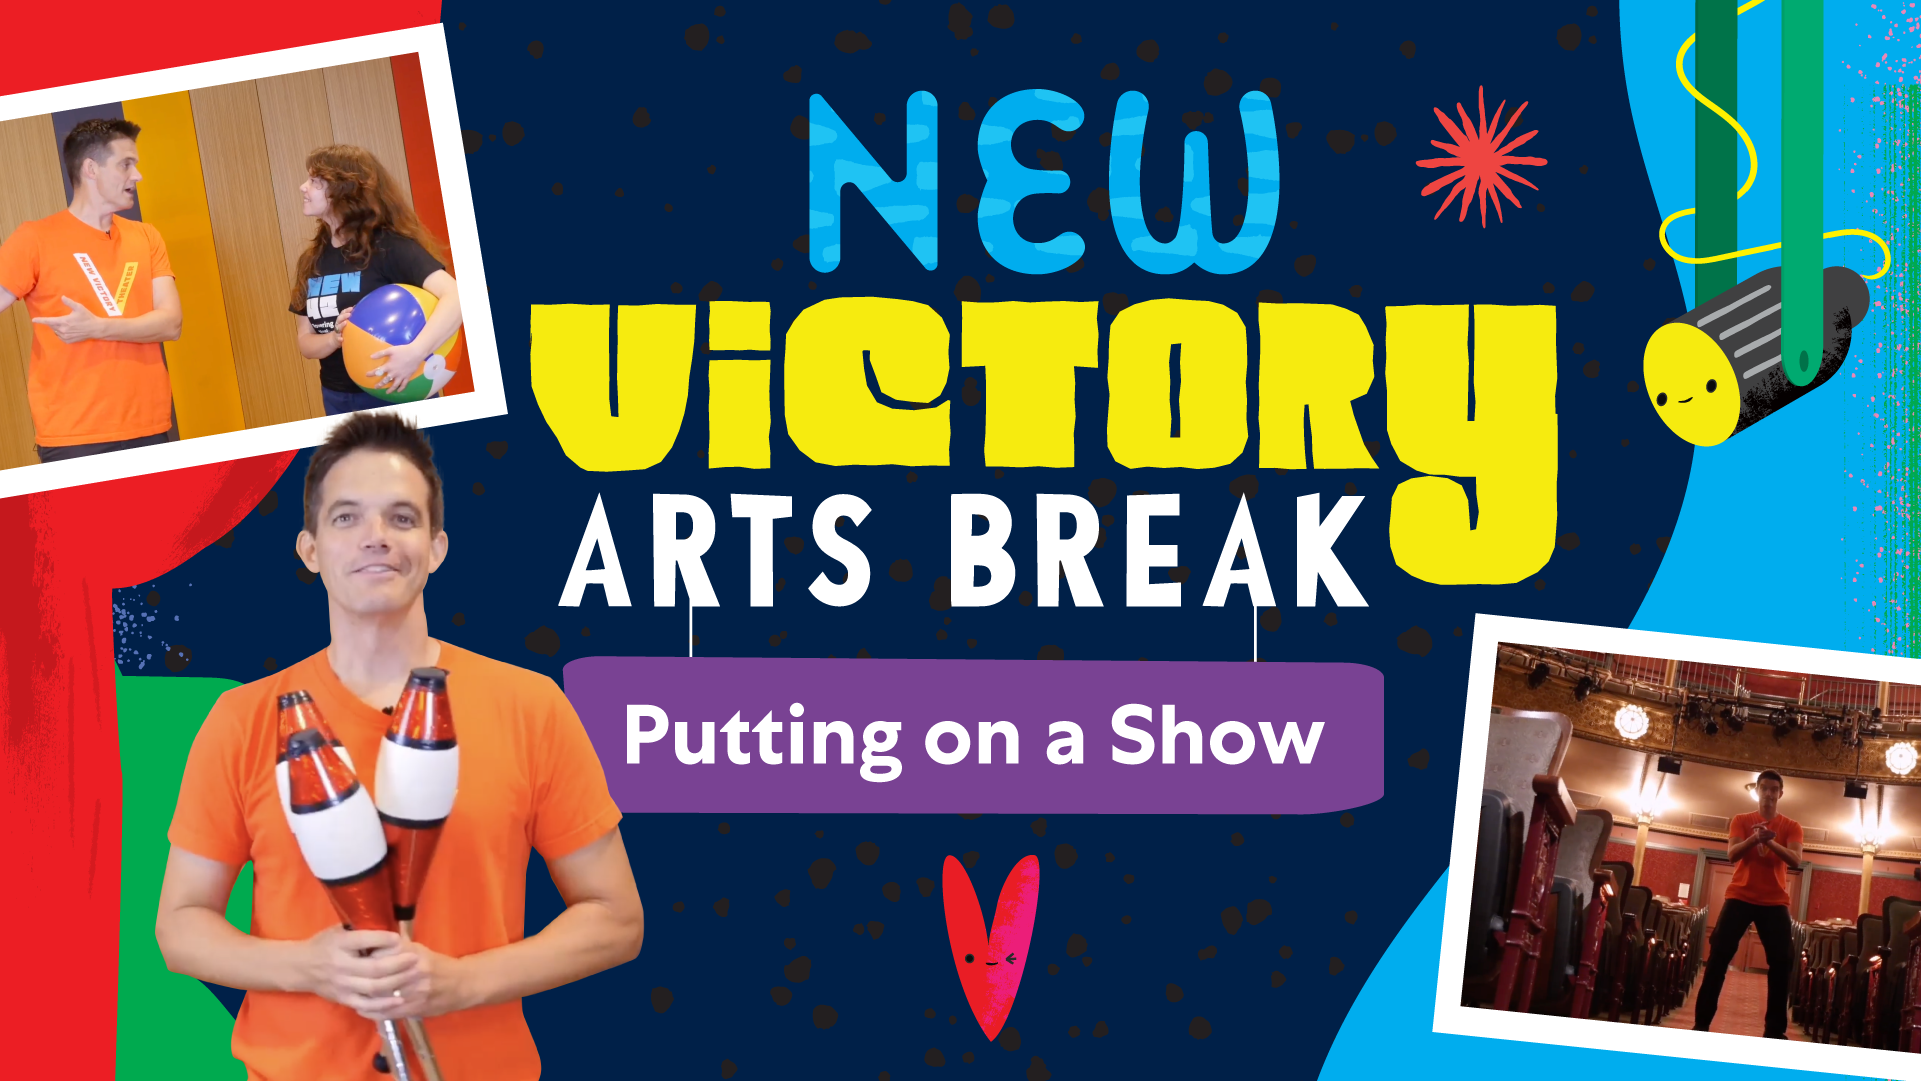 New Victory Arts Break: Putting on a Show